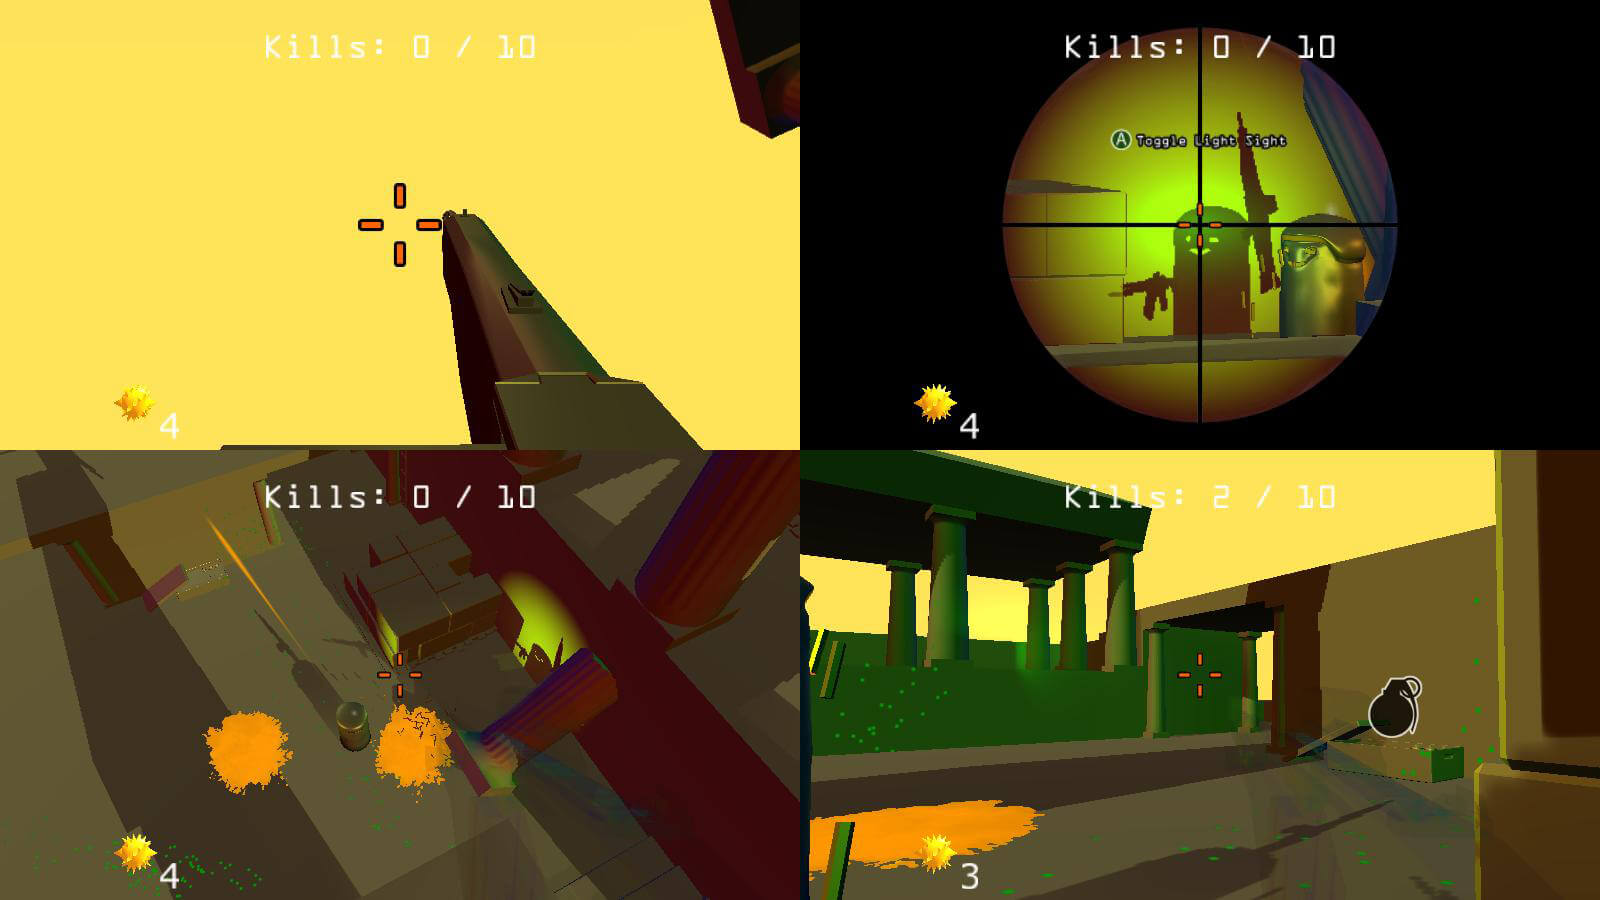 A four player split-screen view, one in the top right sees a player's shadow.